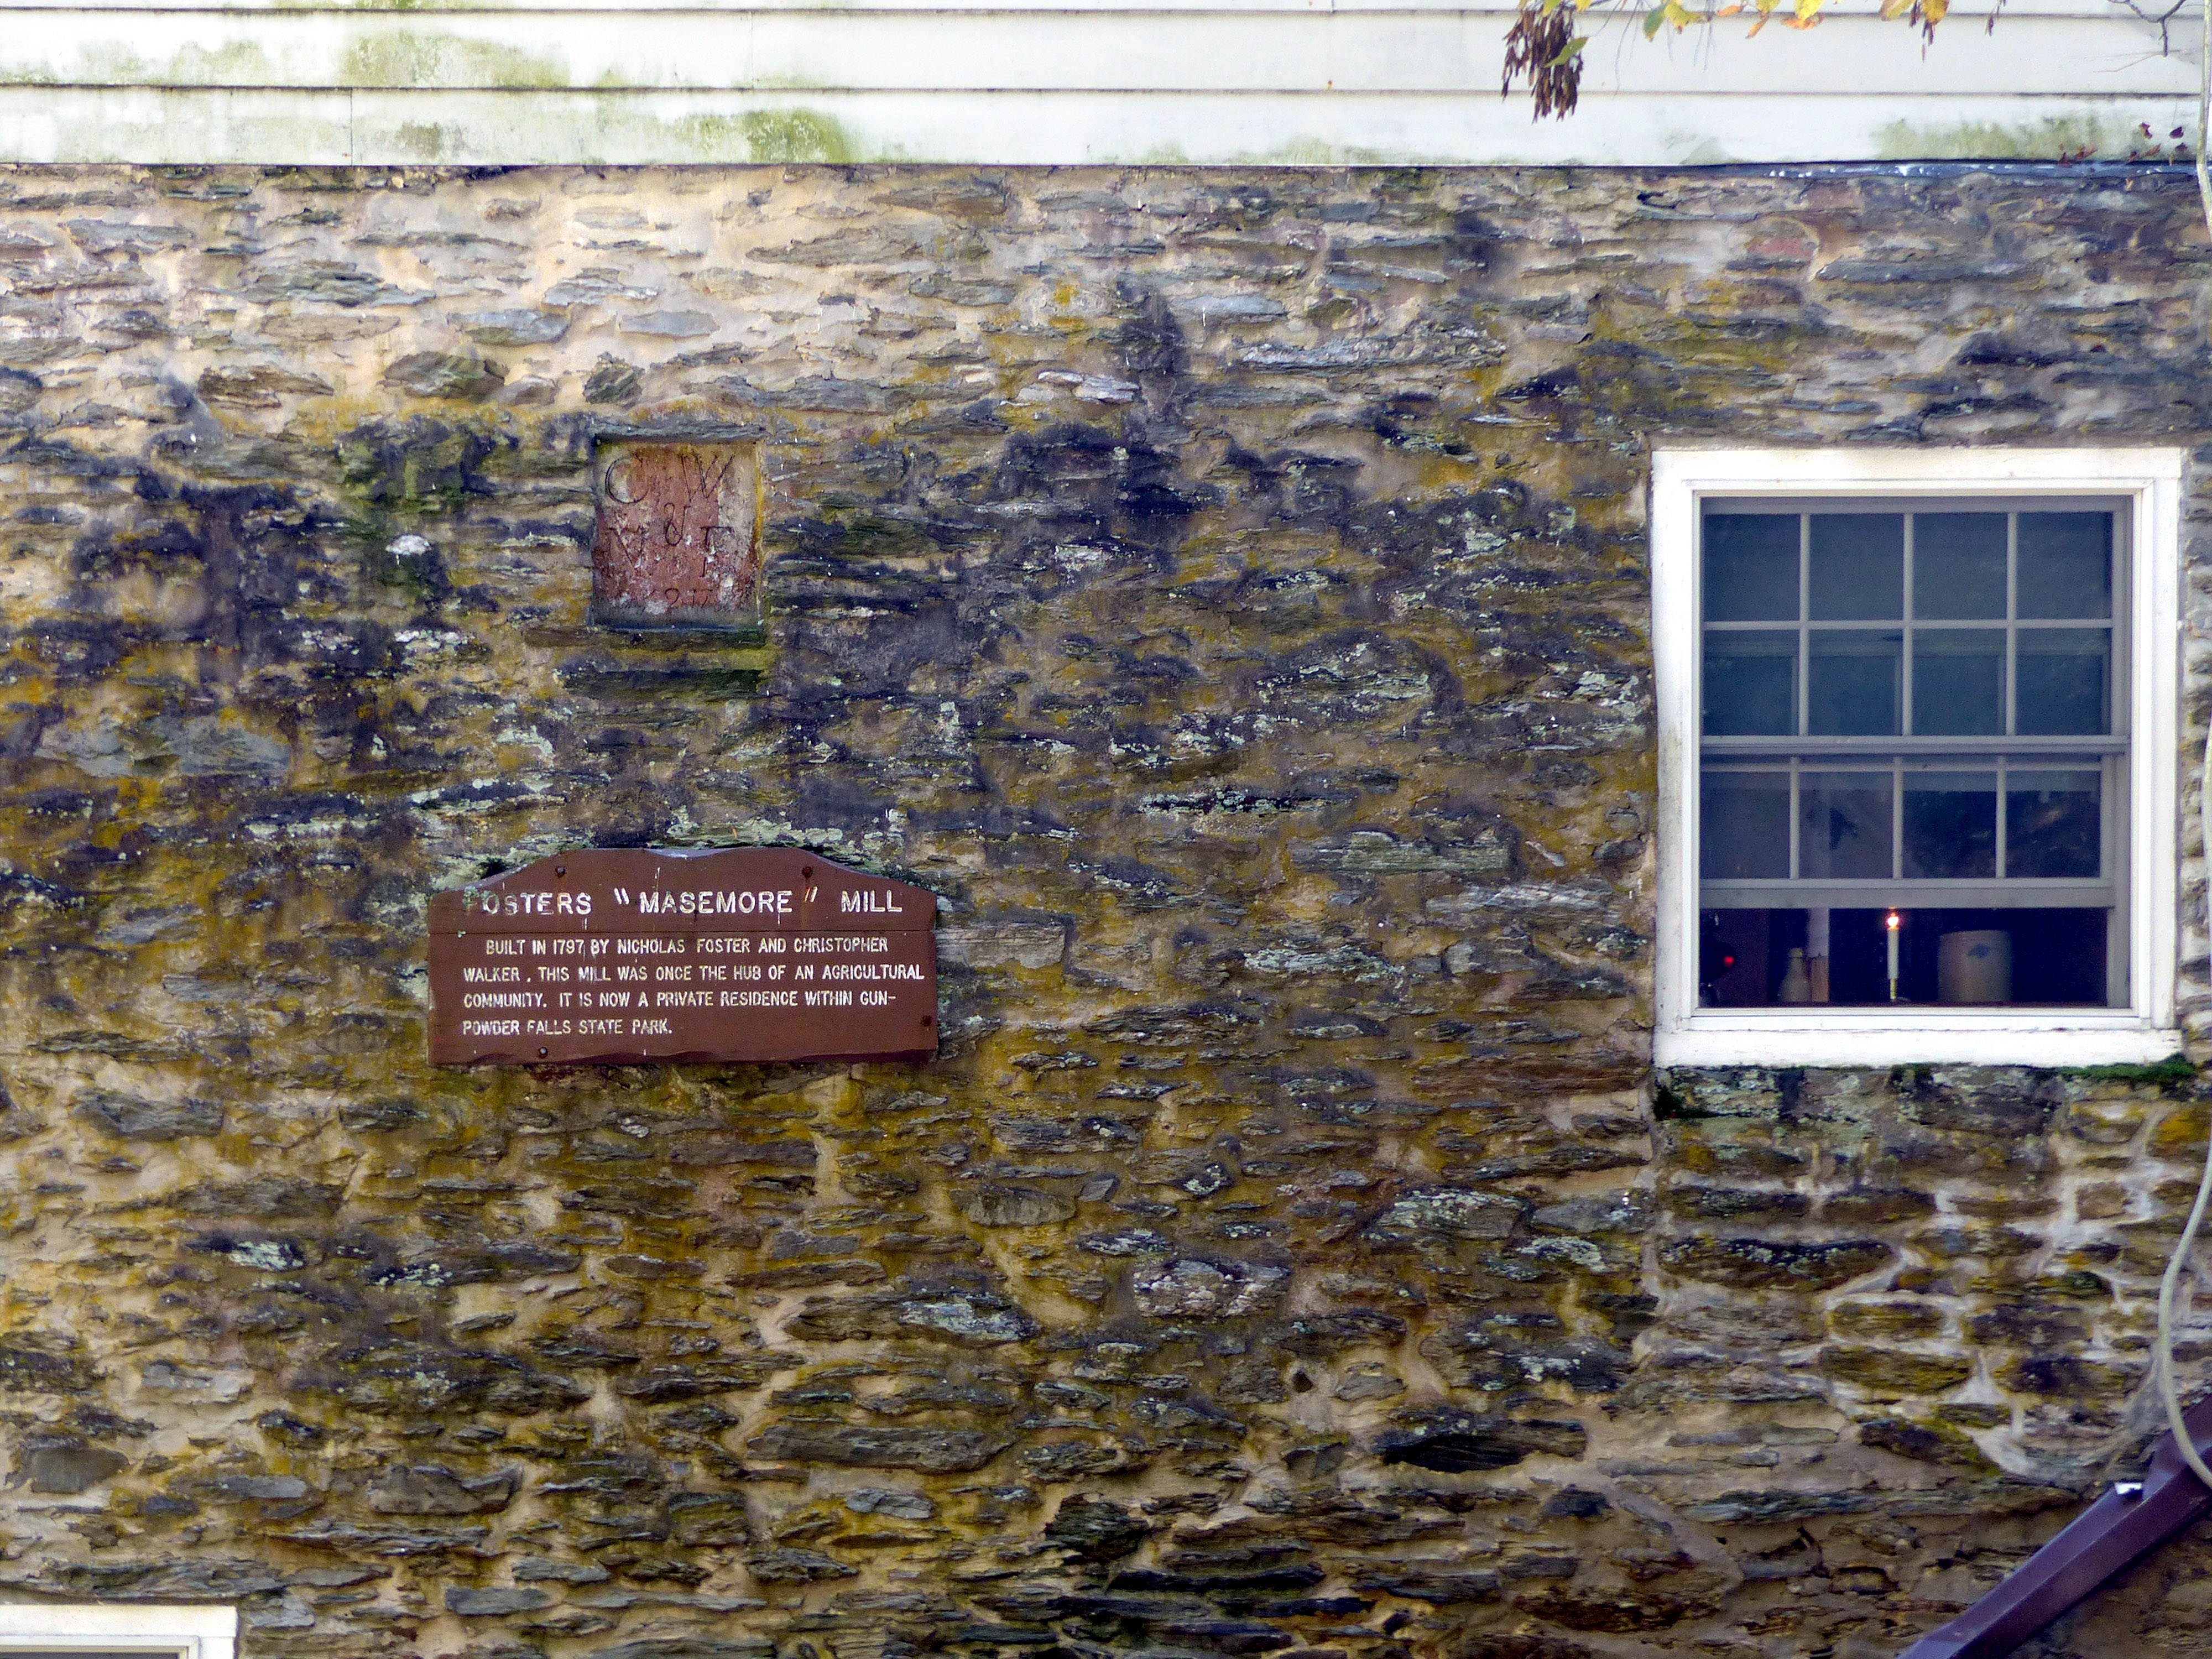 Fosters "Masemore" Mill Marker